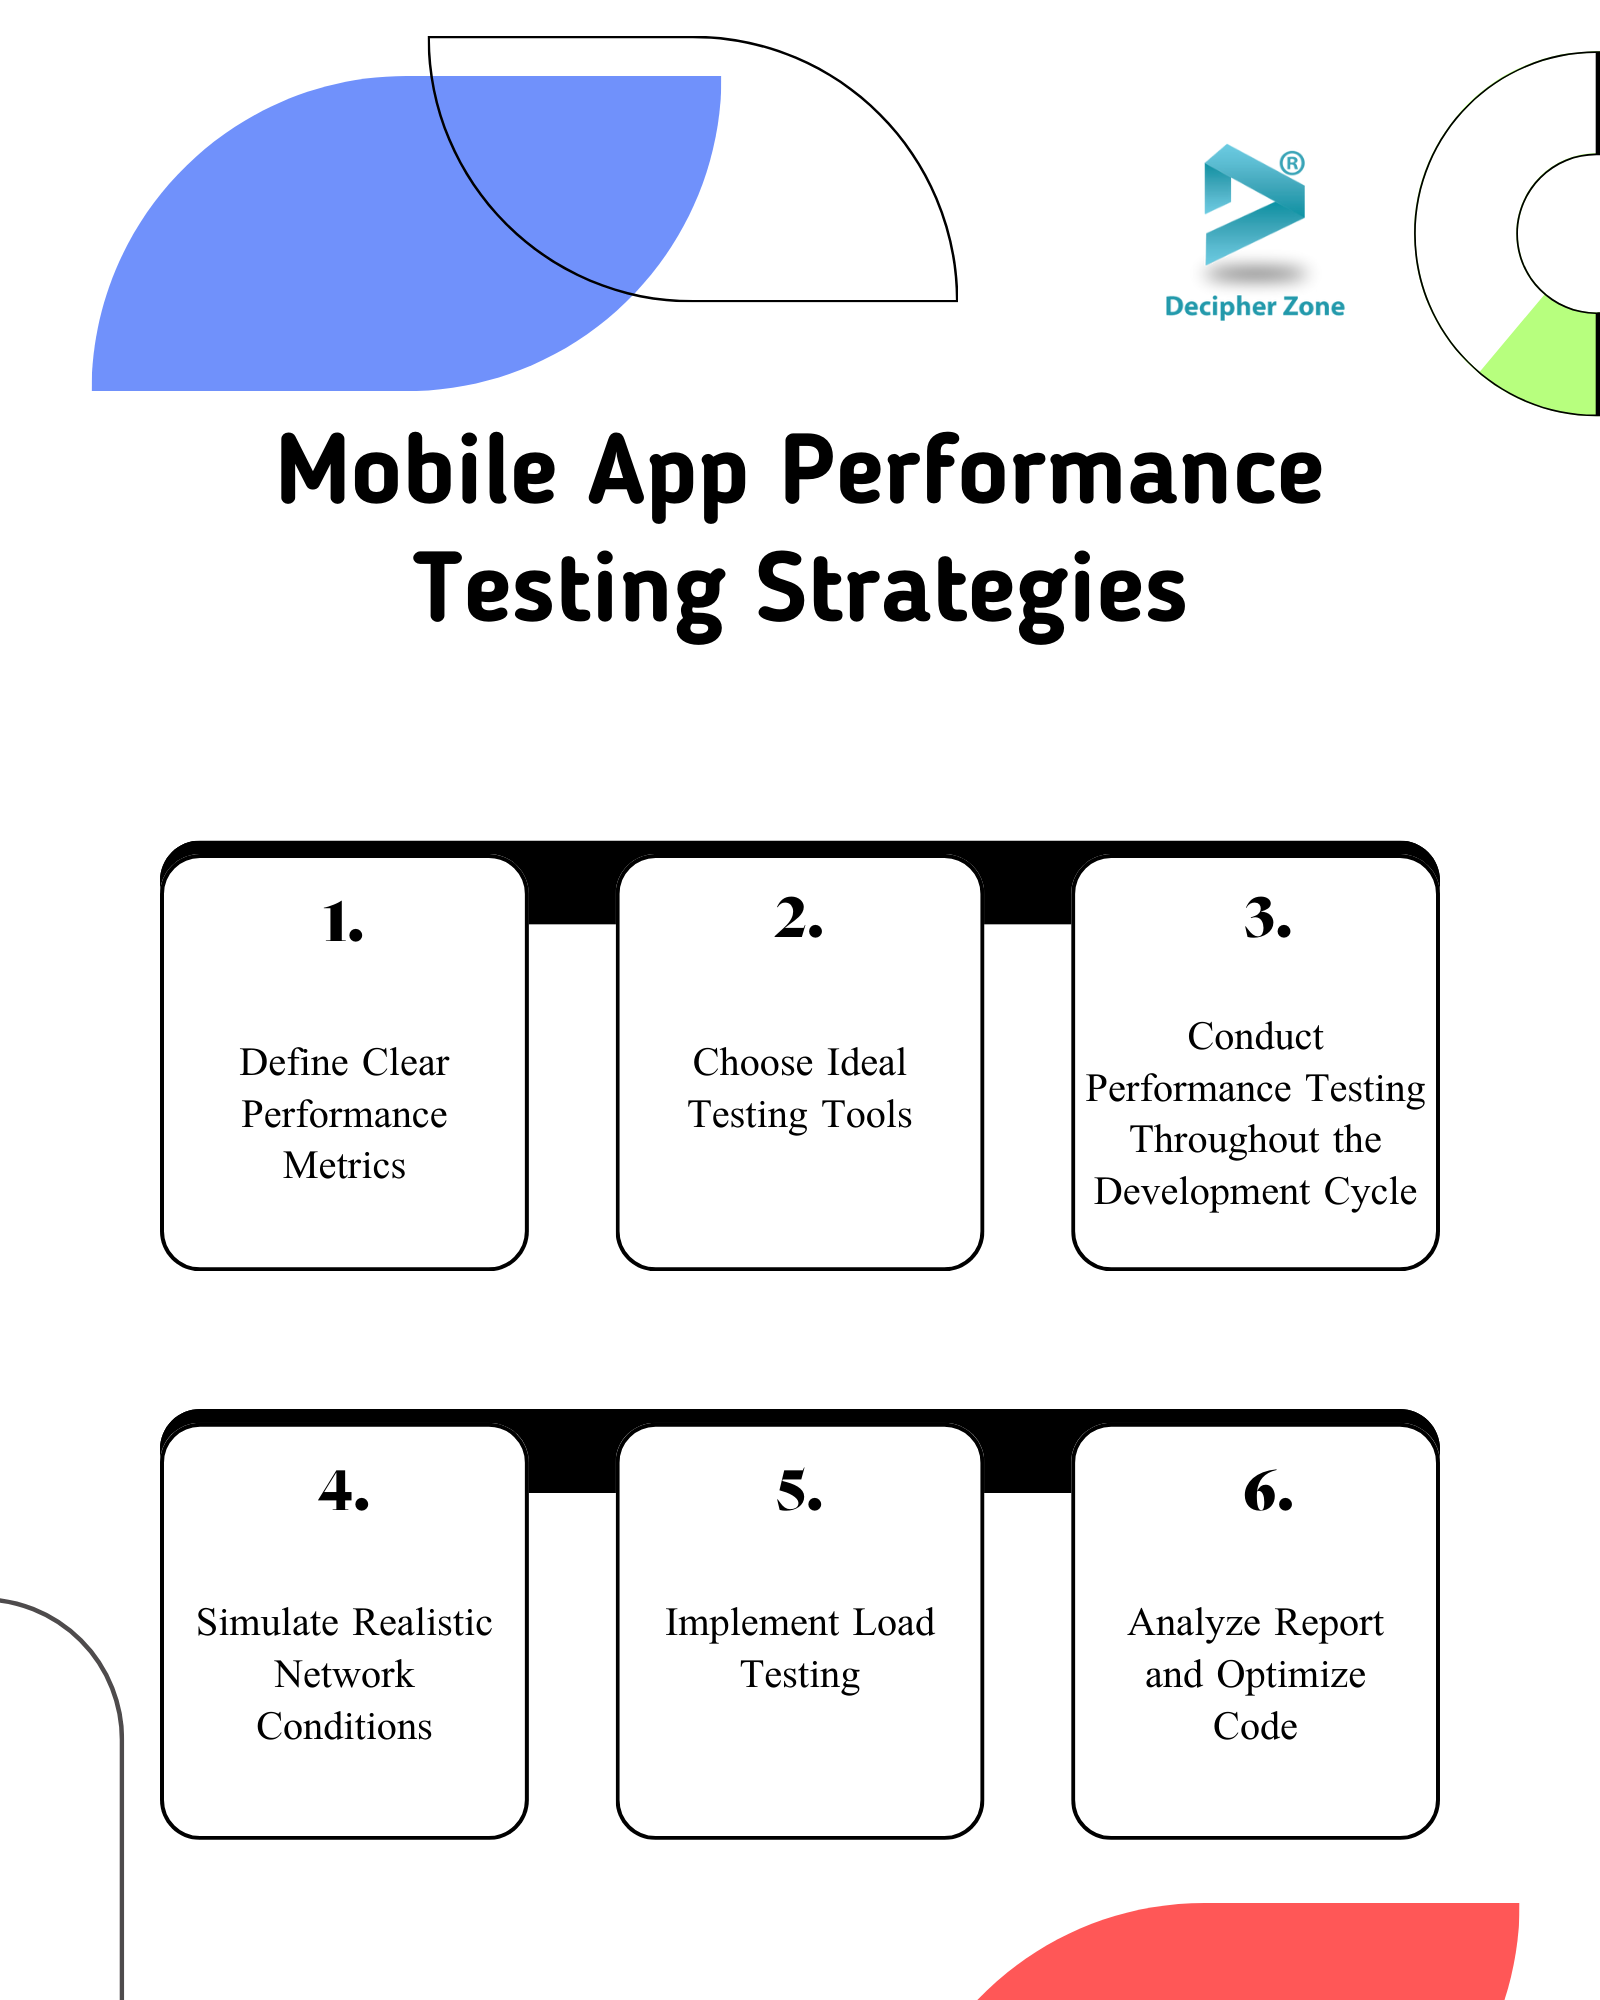 How to Test Mobile App Performance?